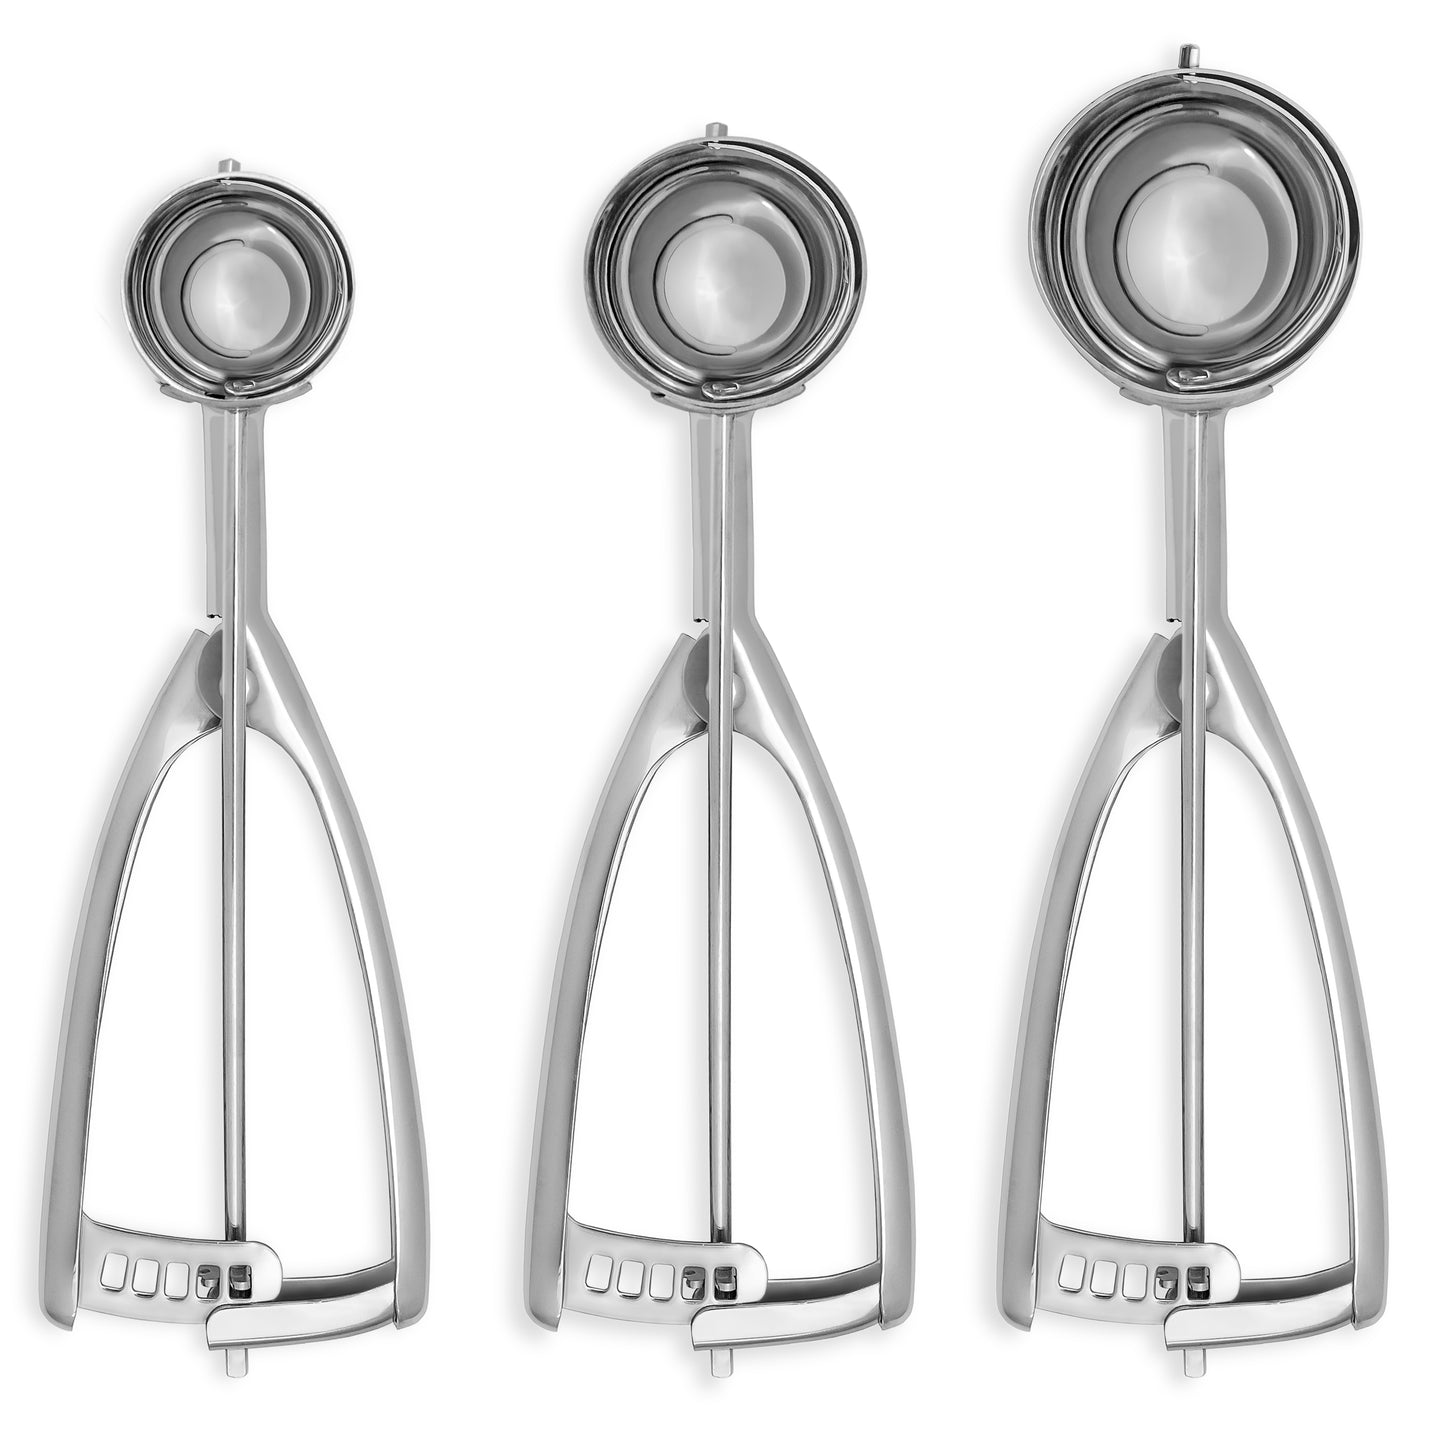 Jenaluca Ice Cream Scoop - 18/8 Stainless Steel (Gift Pack Extra Large)